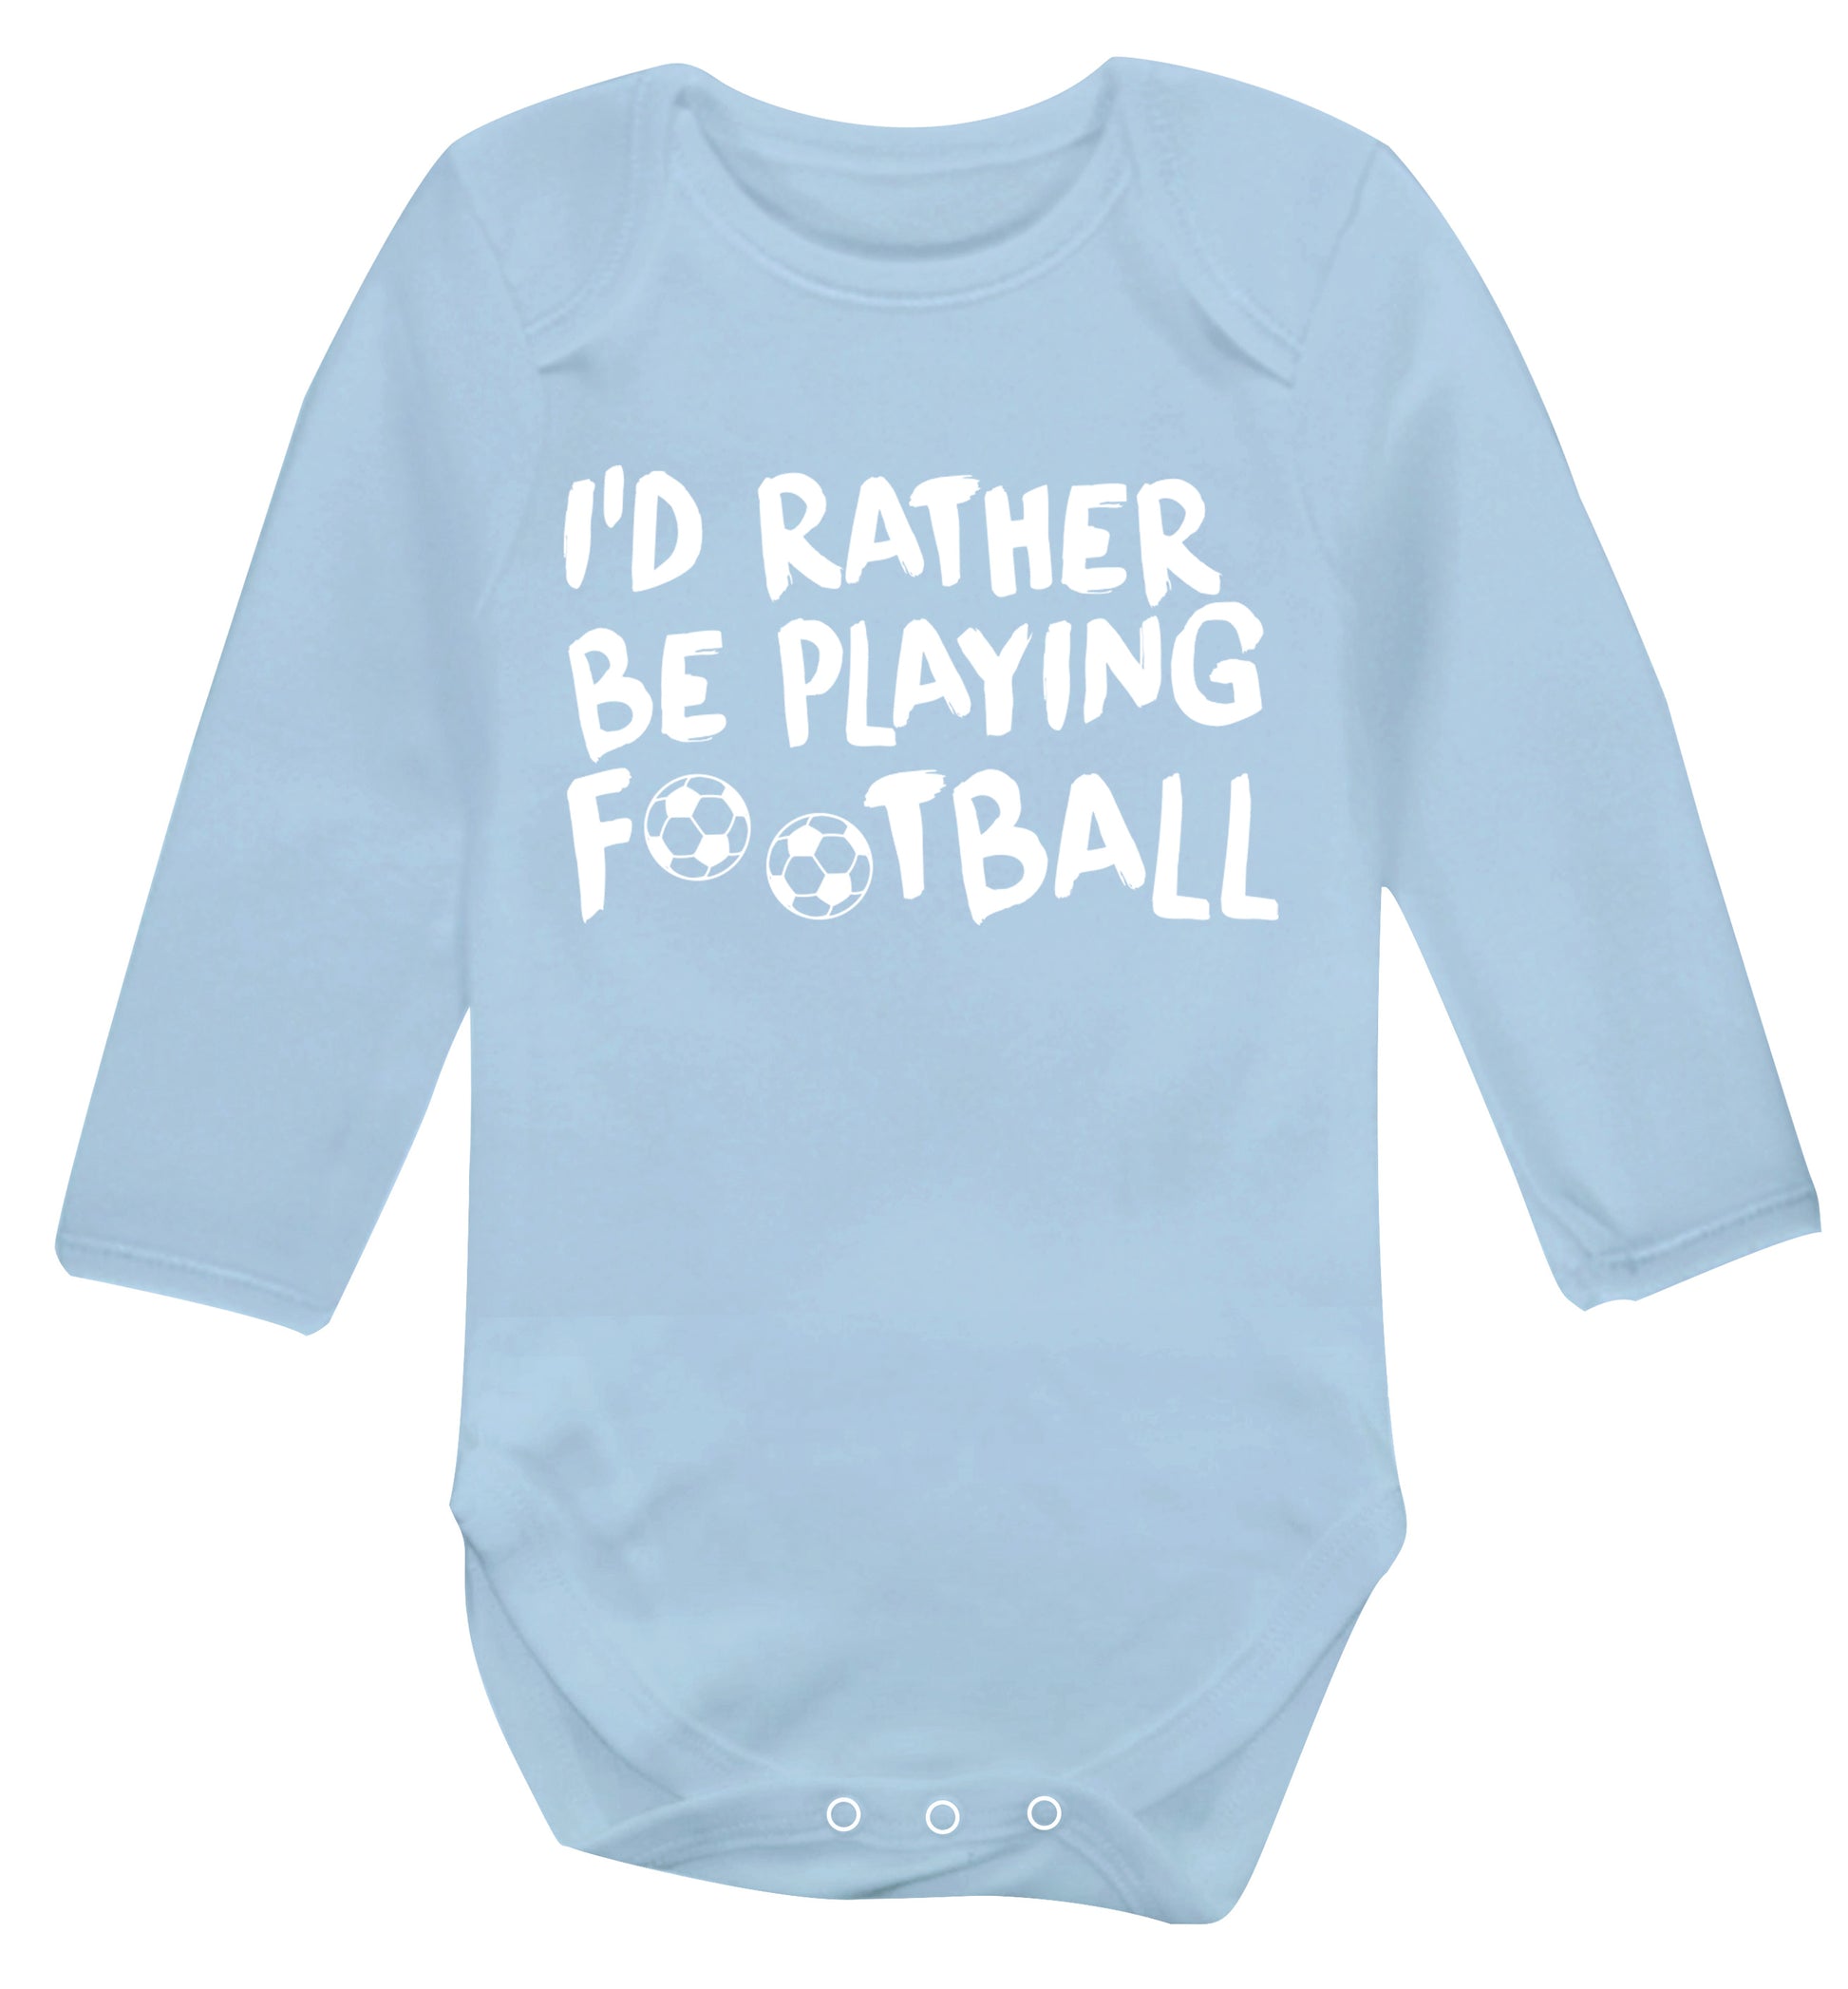 I'd rather be playing football Baby Vest long sleeved pale blue 6-12 months